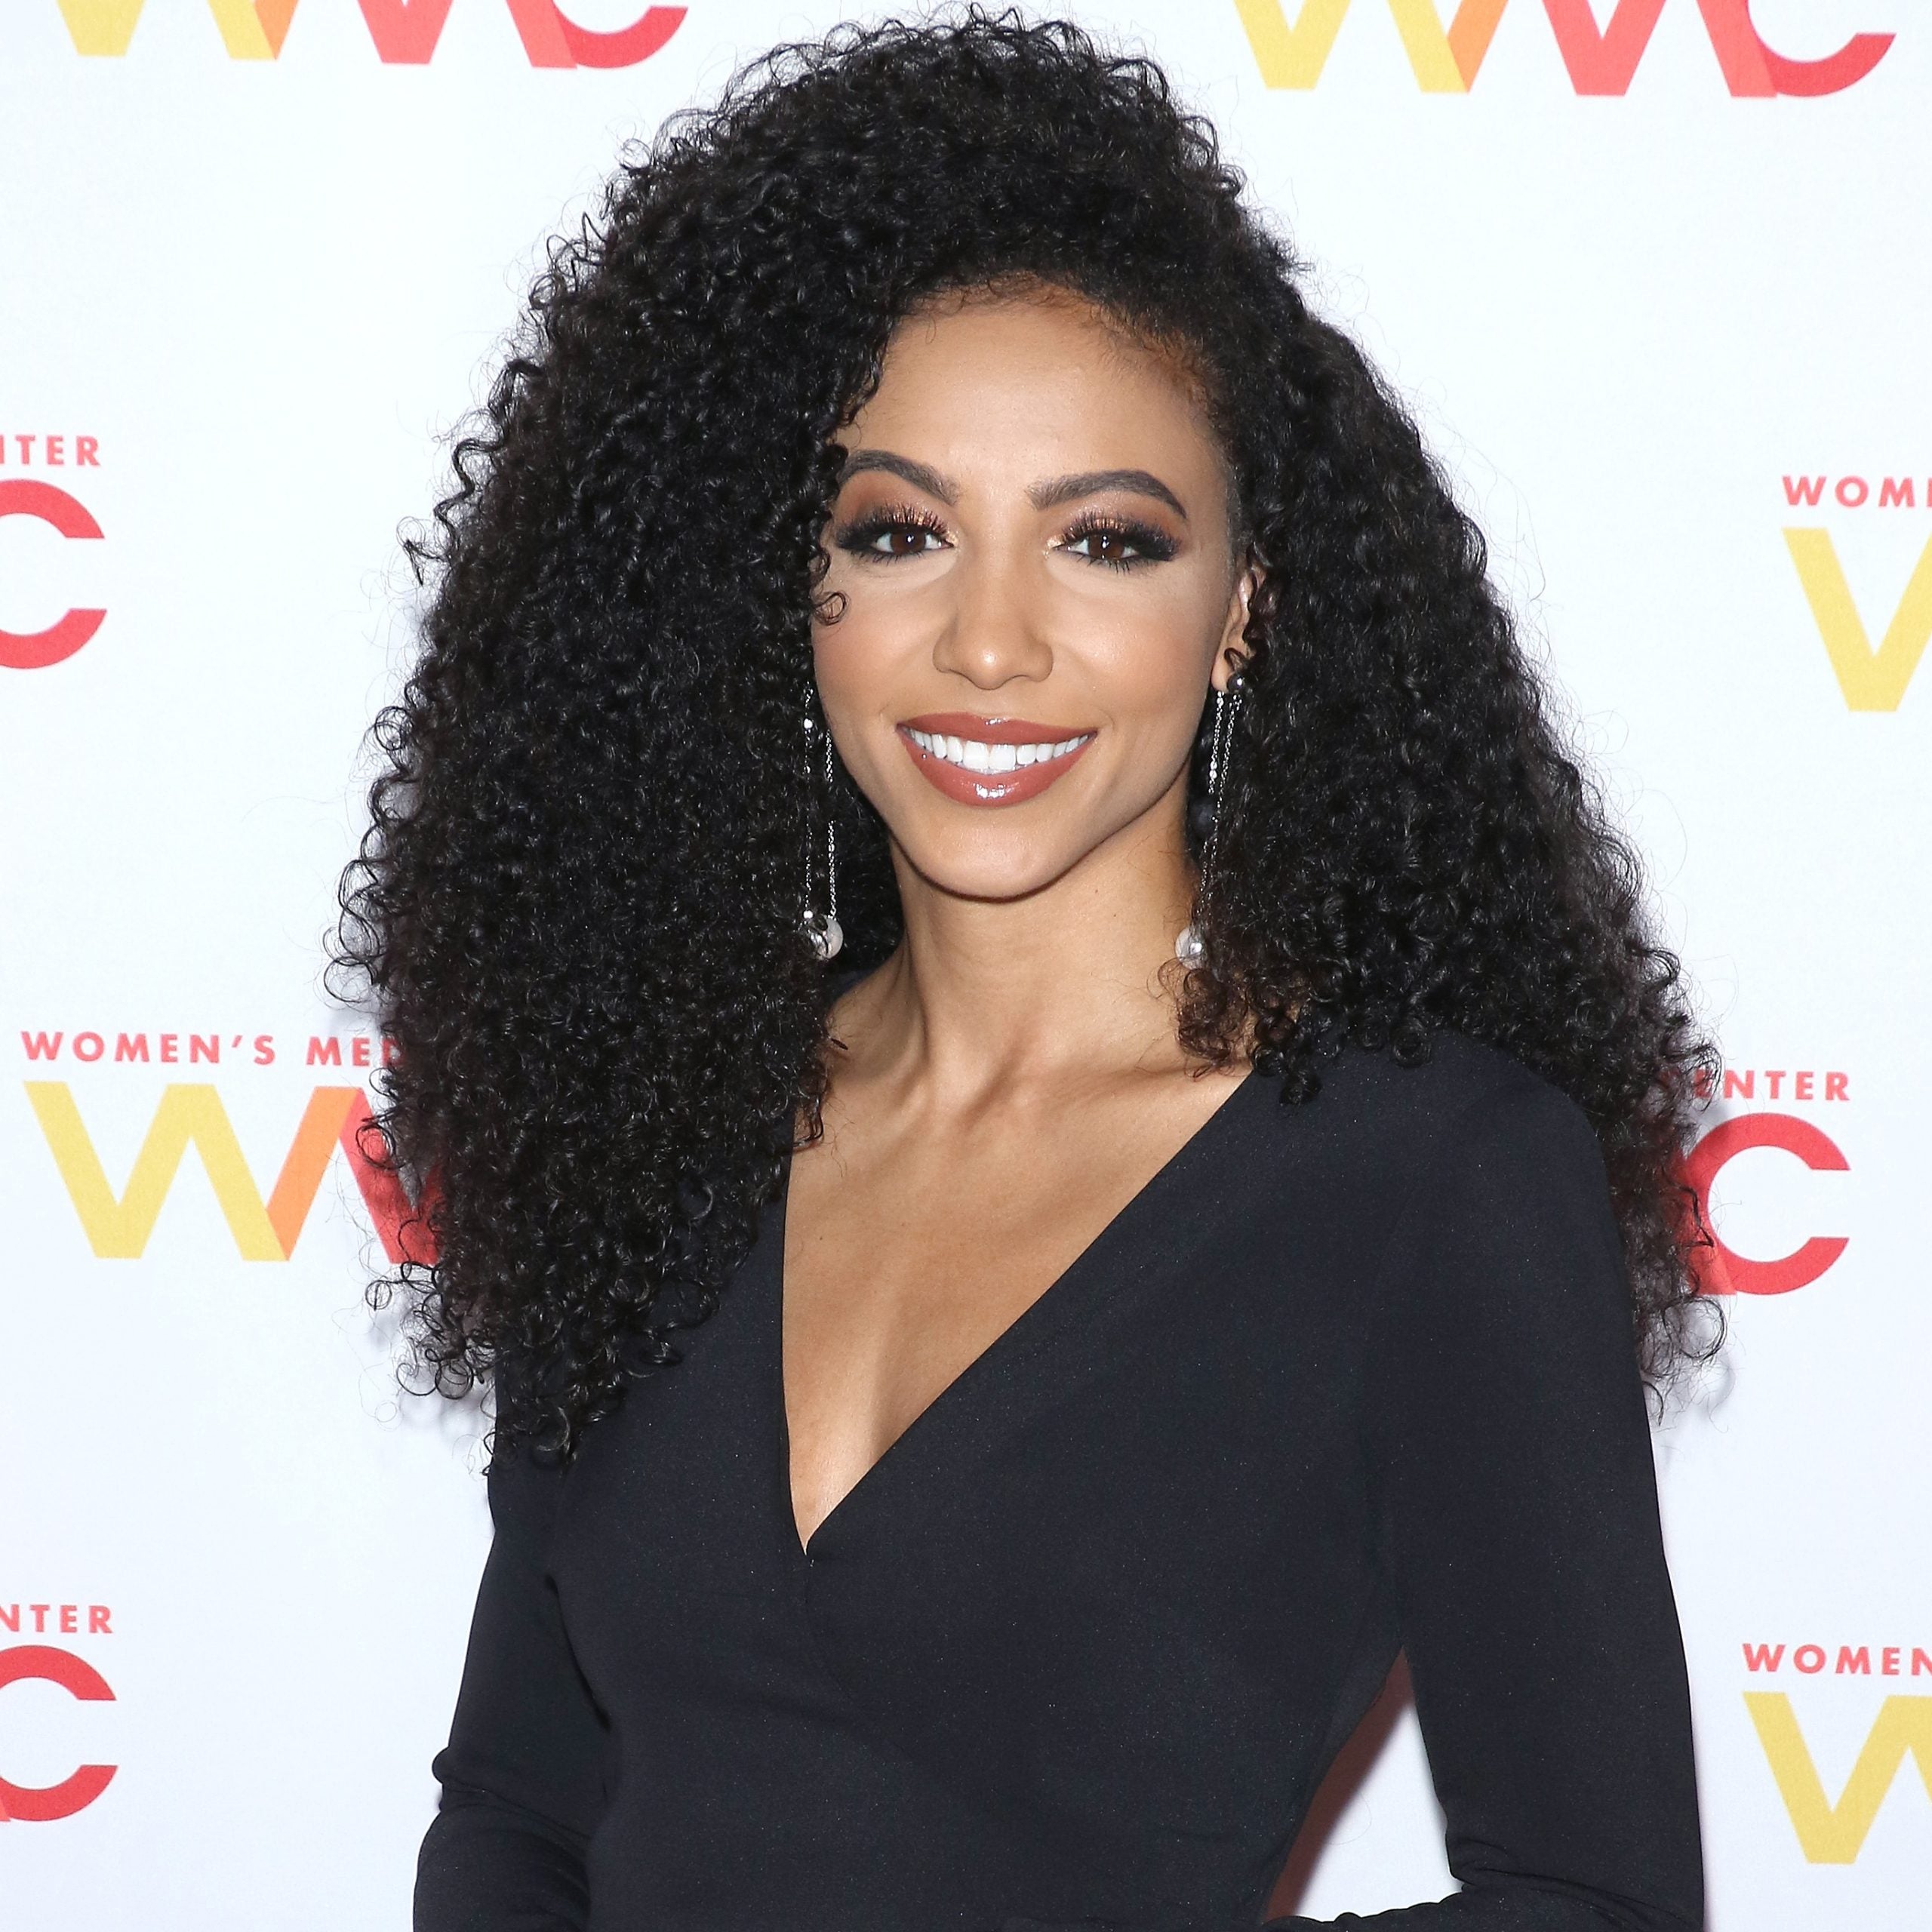 Former Miss USA Cheslie Kryst's Book Will Be Published This Year With The Help Of Her Mom, Two Years After Her Death